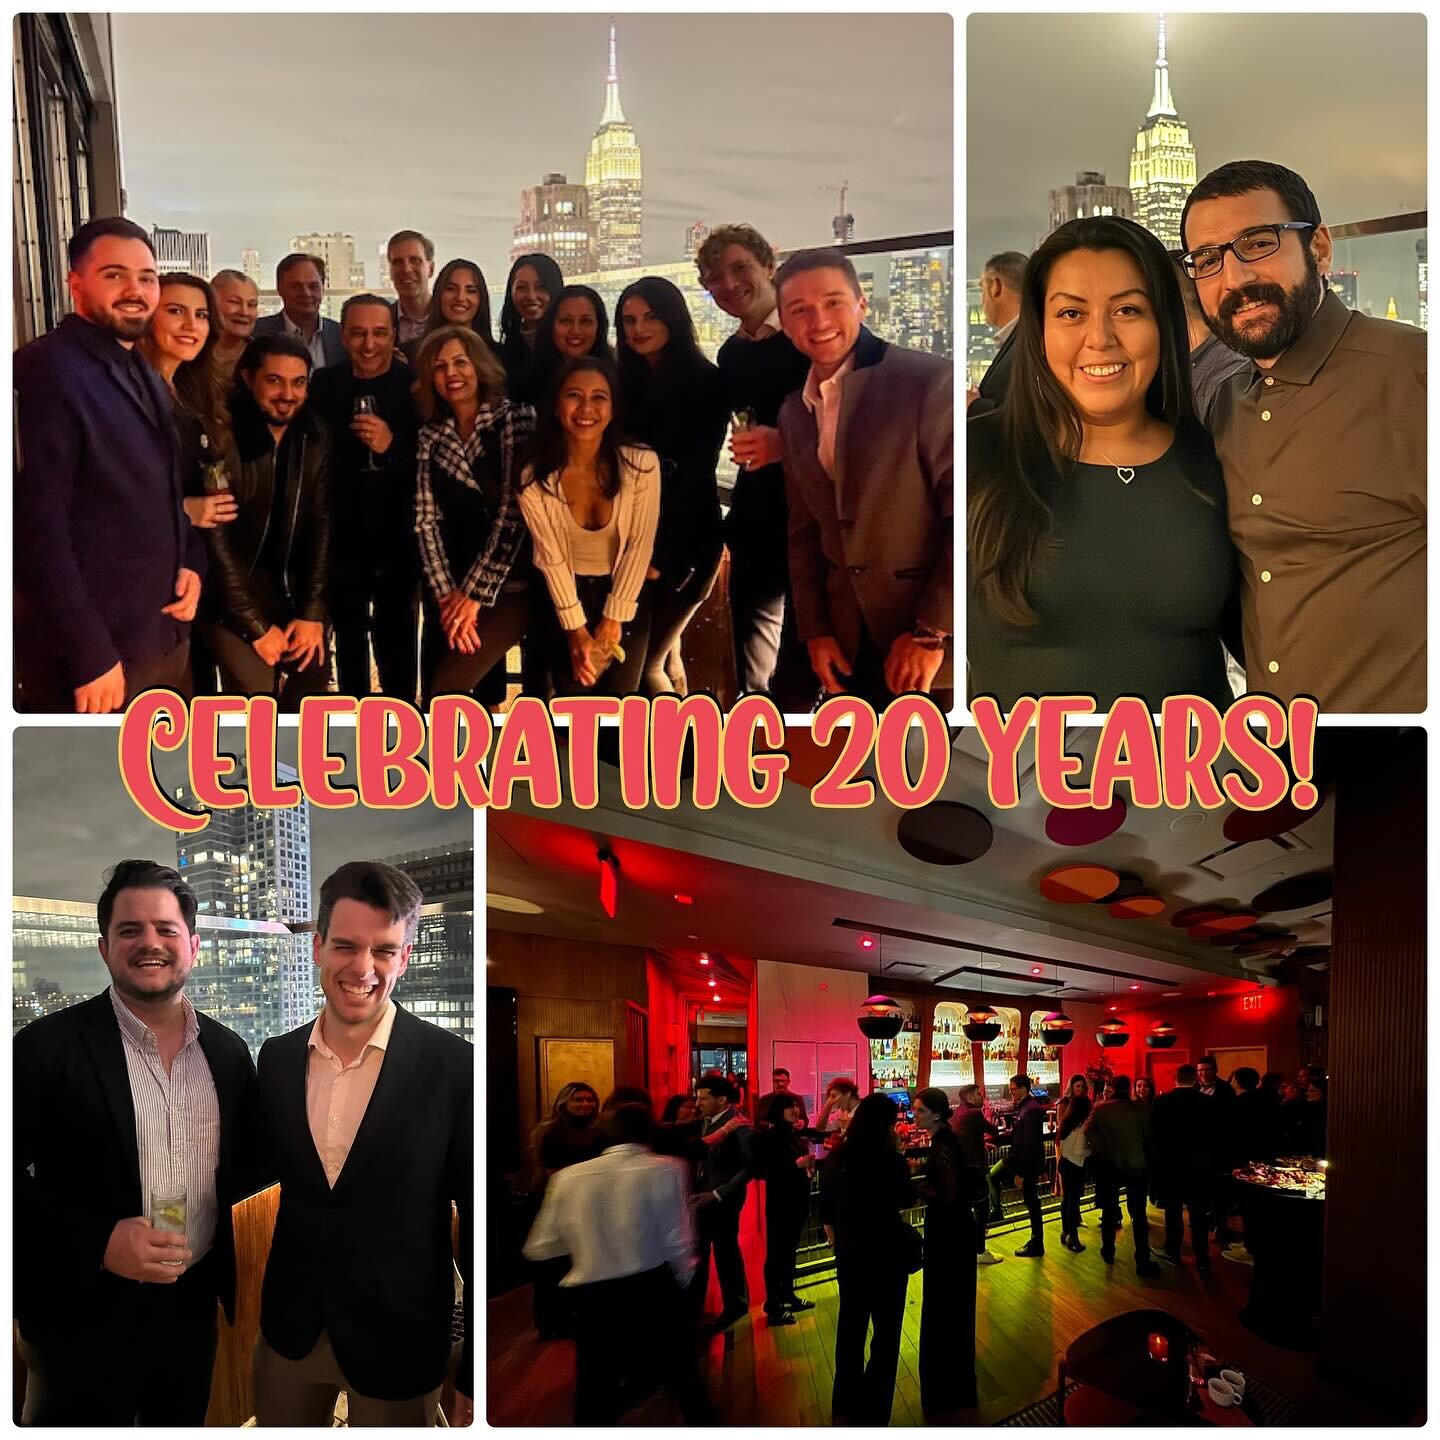 Last week, Atmosphere Design Group celebrated 20 years of business with staff, friends and clients at a rooftop celebration in NYC. We are proud of all that the Atmosphere team has accomplished in the past 20 years. We are grateful for all of our cli